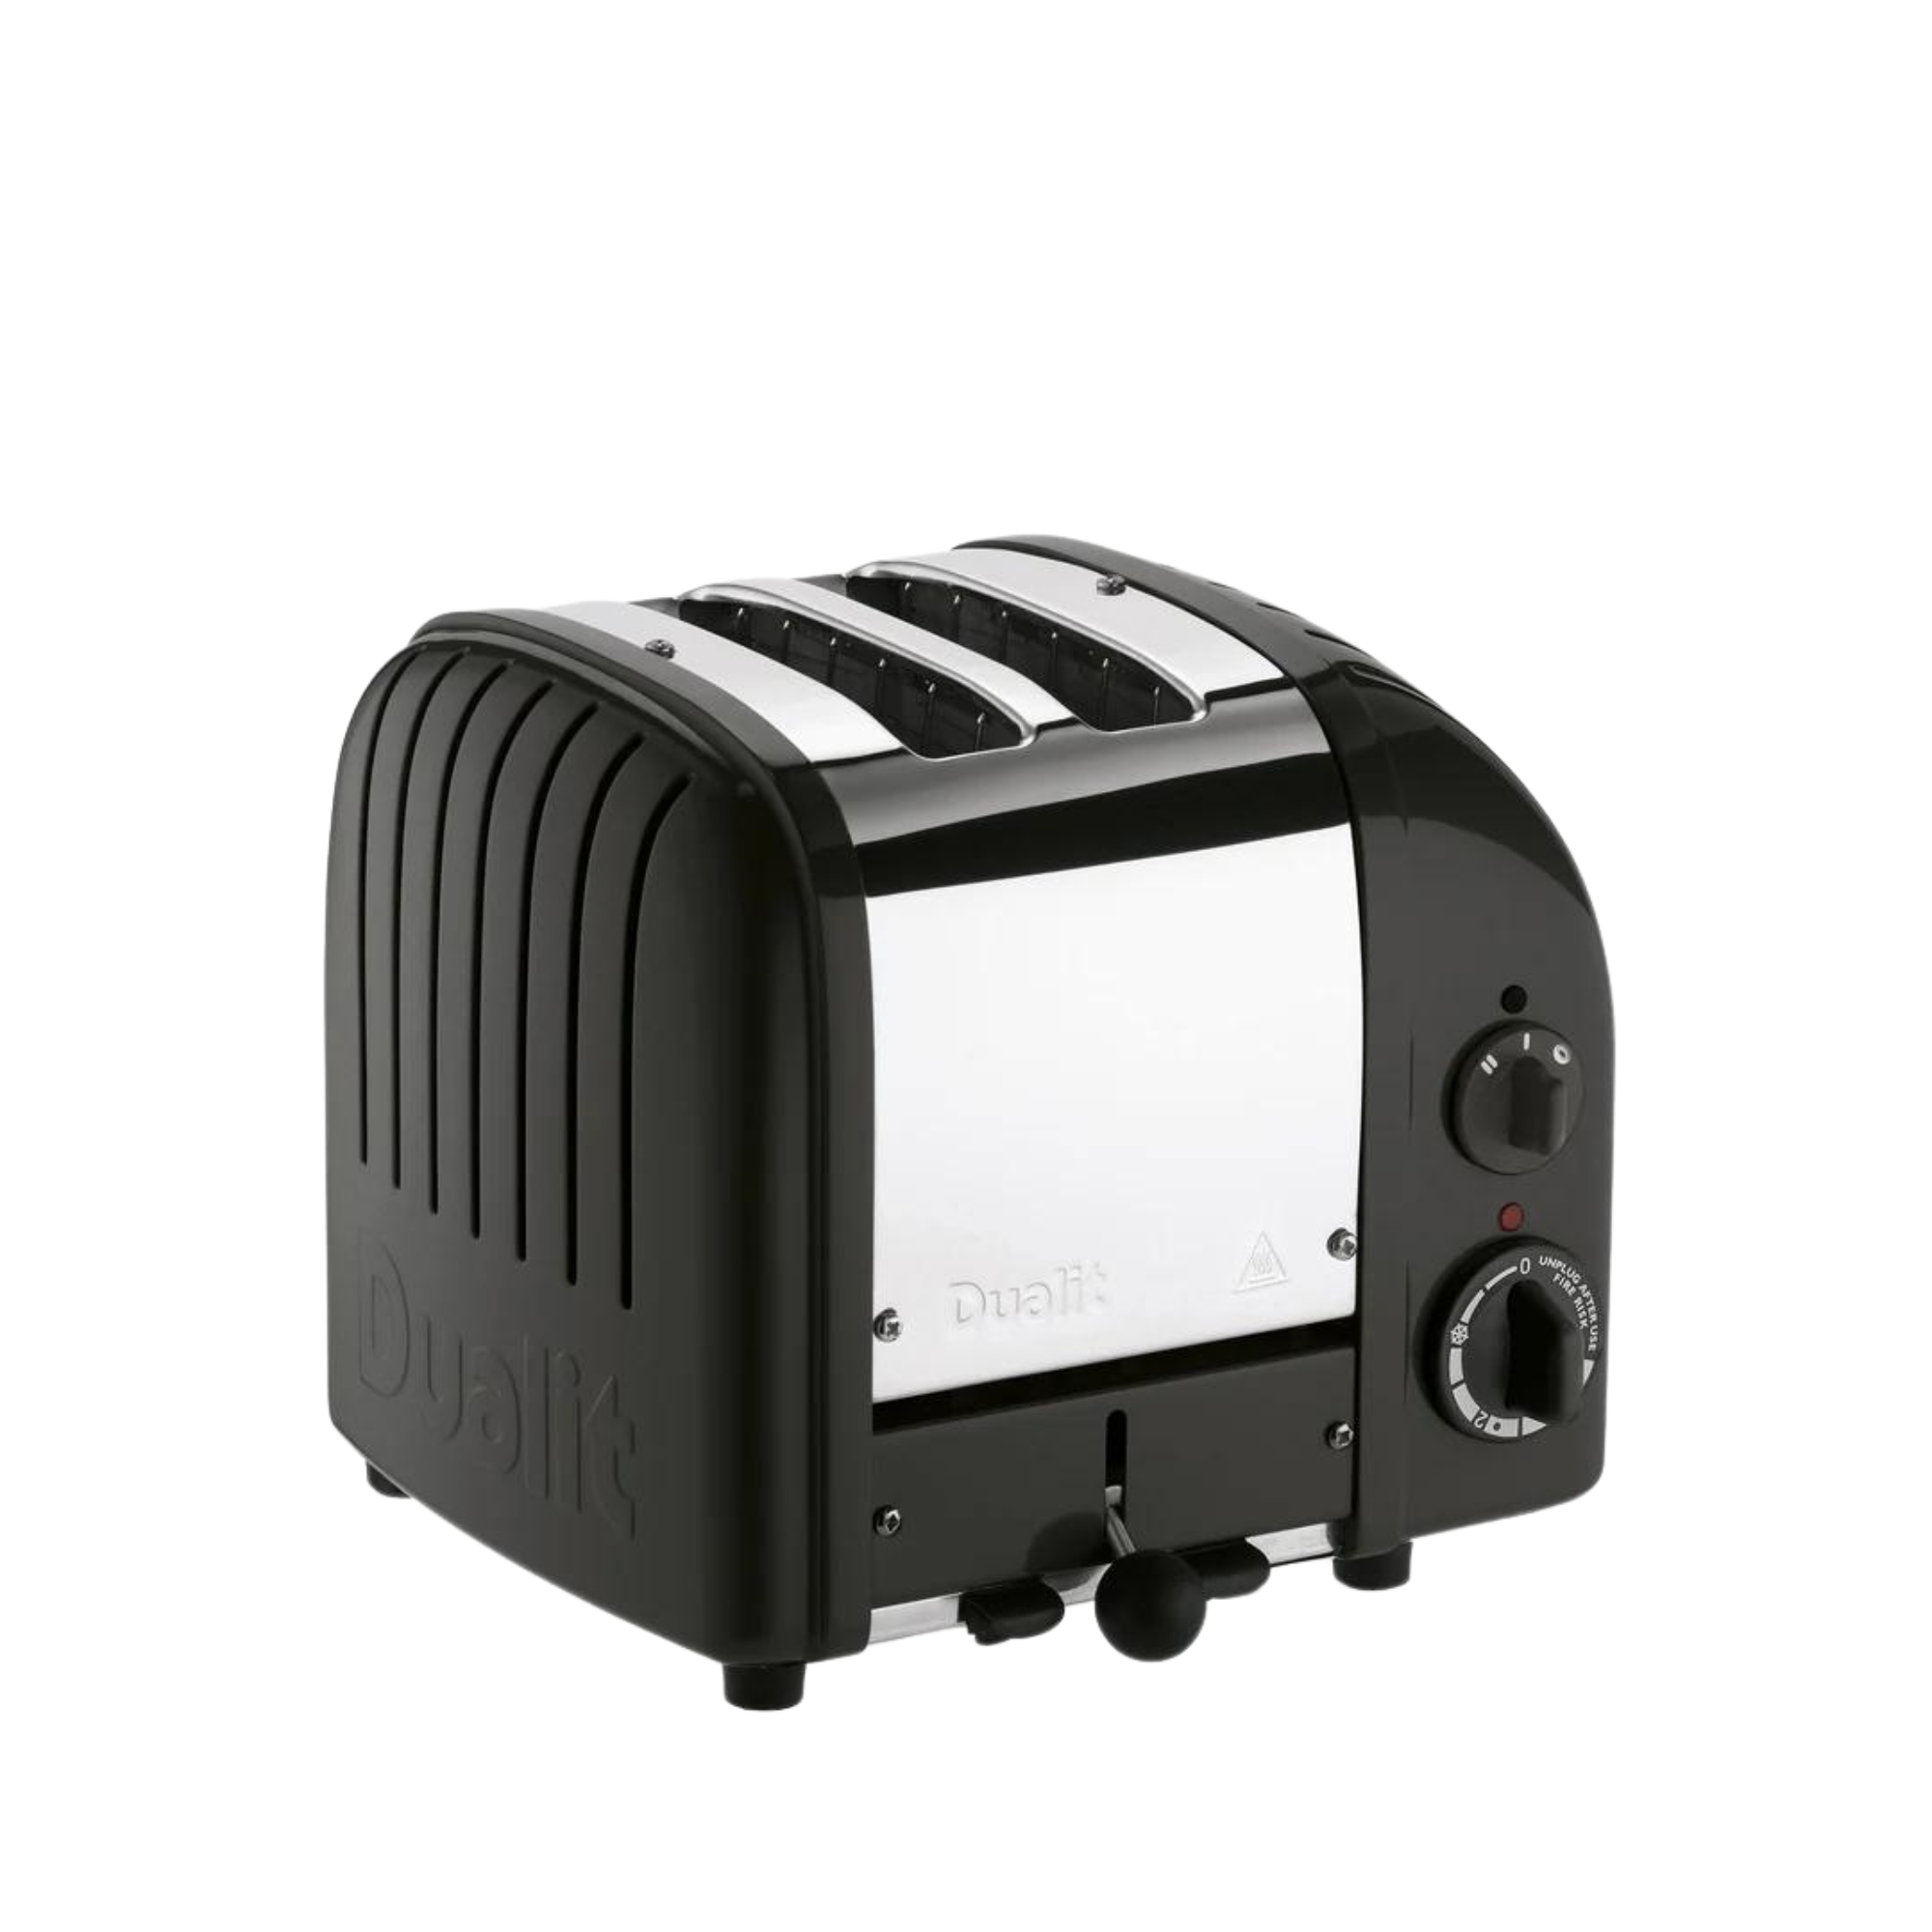 Dualit Classic 2er-Toaster